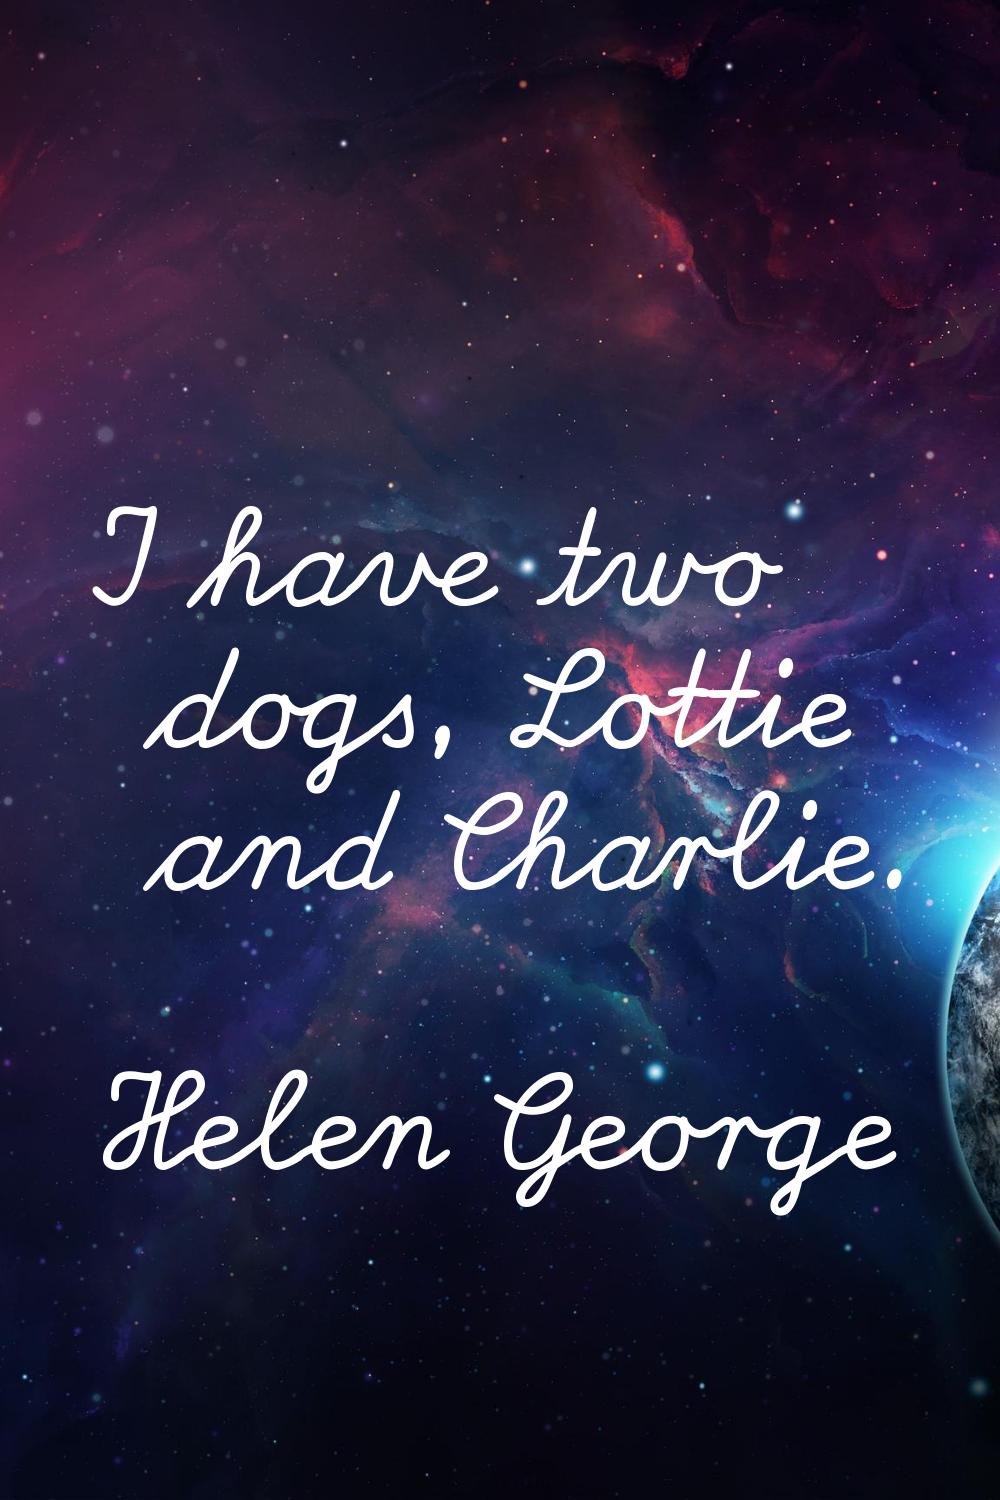 I have two dogs, Lottie and Charlie.